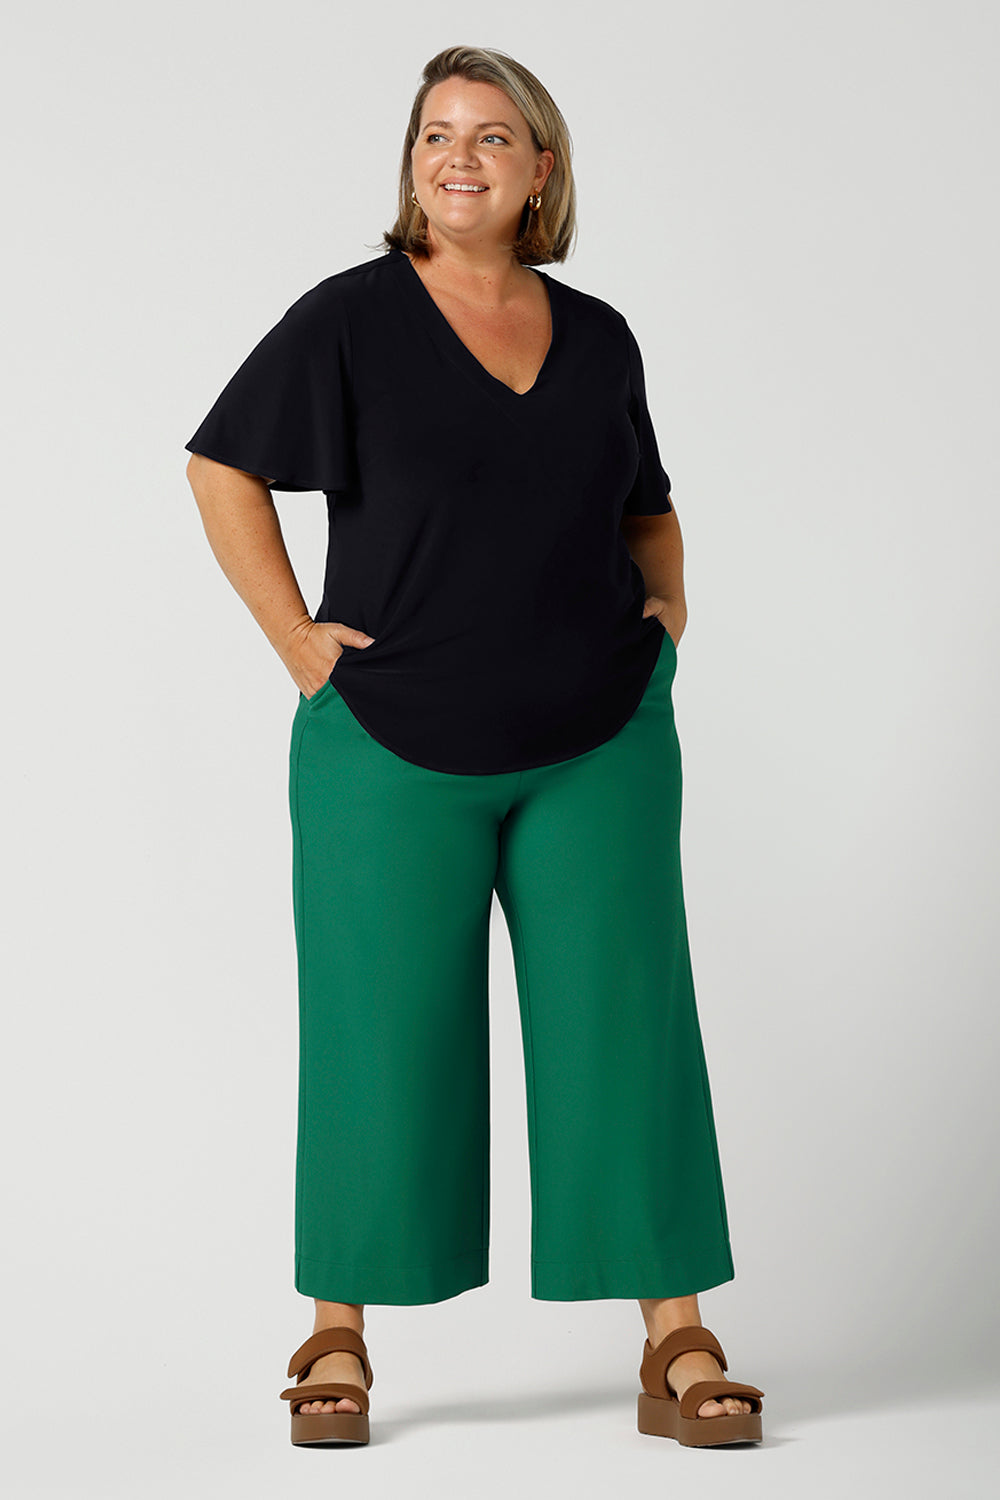 Worn by a size 18, plus size woman, this is a semi-fitted, V-neck top with flutter sleeves in navy blue jersey. Made in Australia by women's clothing brand, Leina & Fleur , this classic navy top is worn with wide leg emerald green tailored pants for summer. Great for capsule wardrobes, smart casual wear and as a work blouse, shop this top and other Australian-made women's clothing online in sizes 8 to 24 at Leina & Fleur's online fashion boutique!